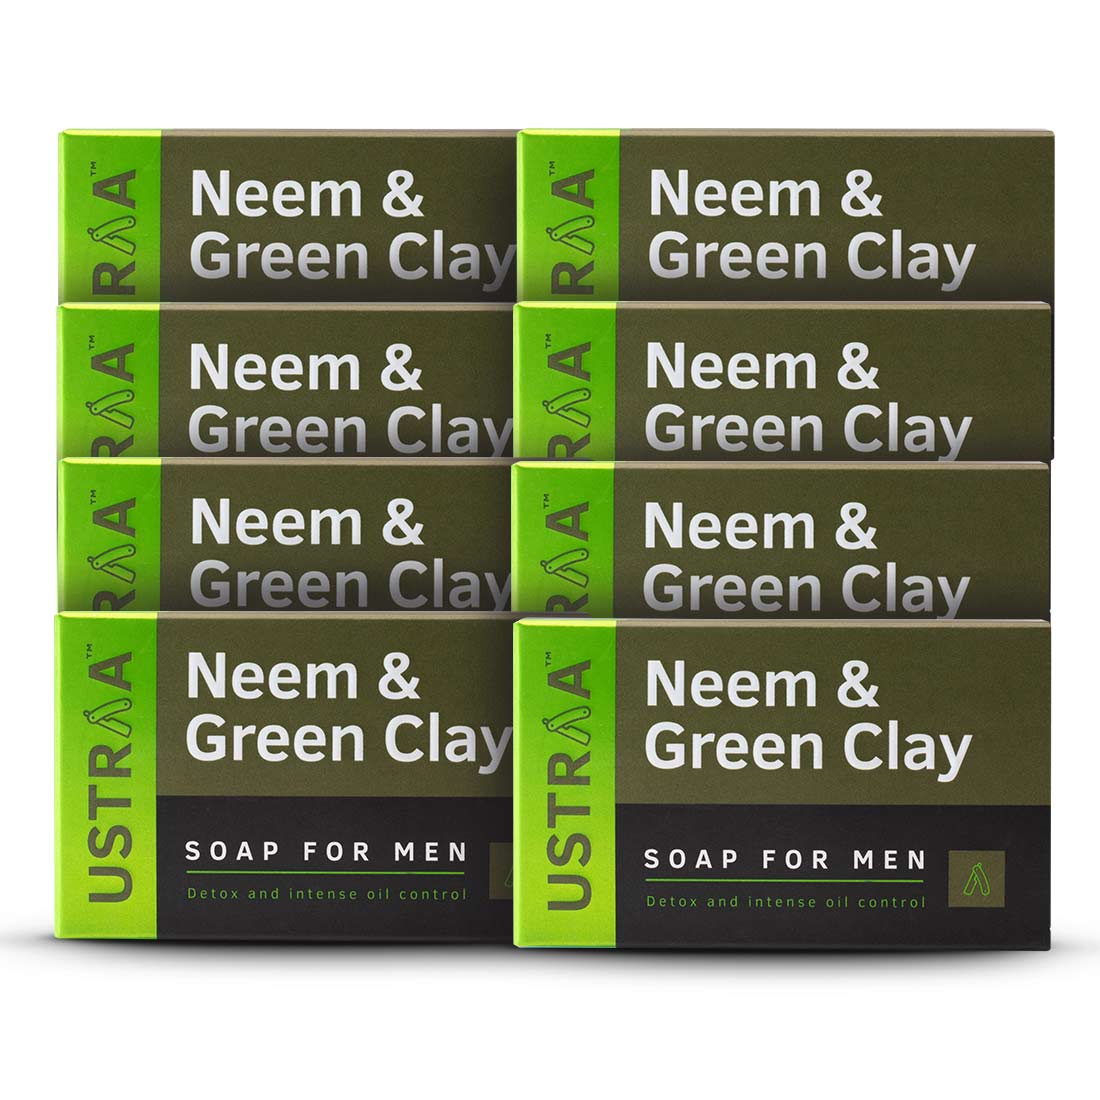 Neem & Green Clay Soap, 100 g (Pack of 8)